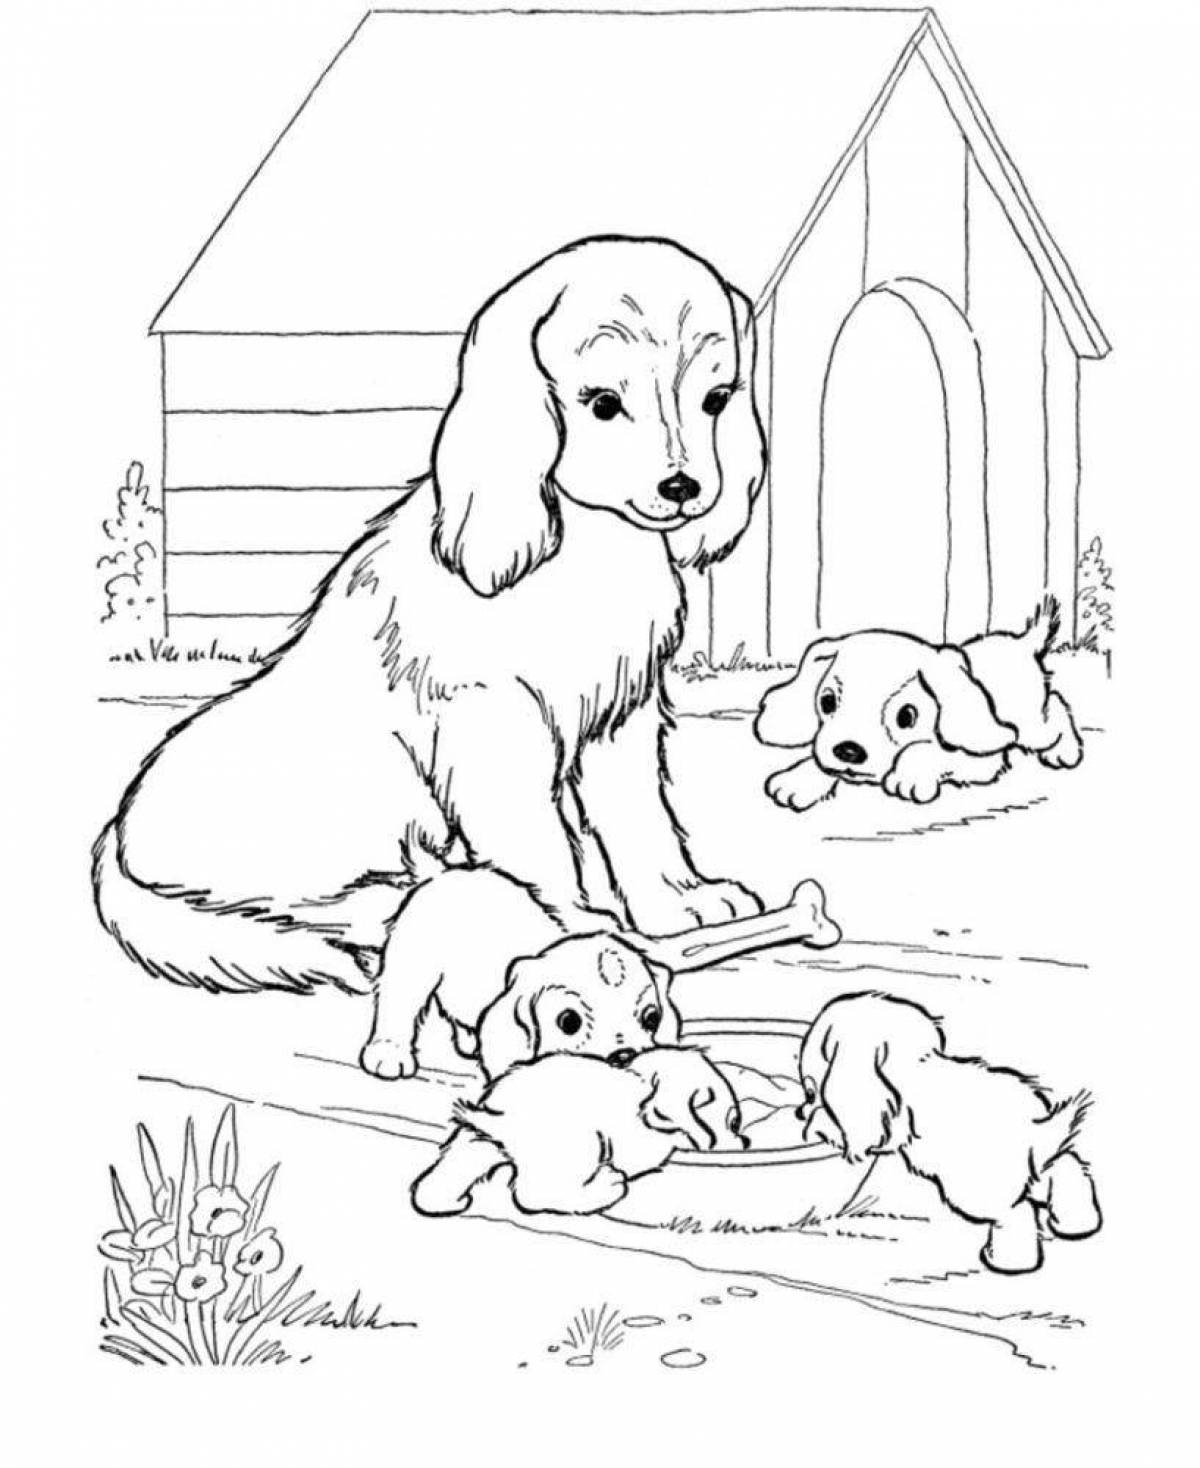 Coloring book smiling dog